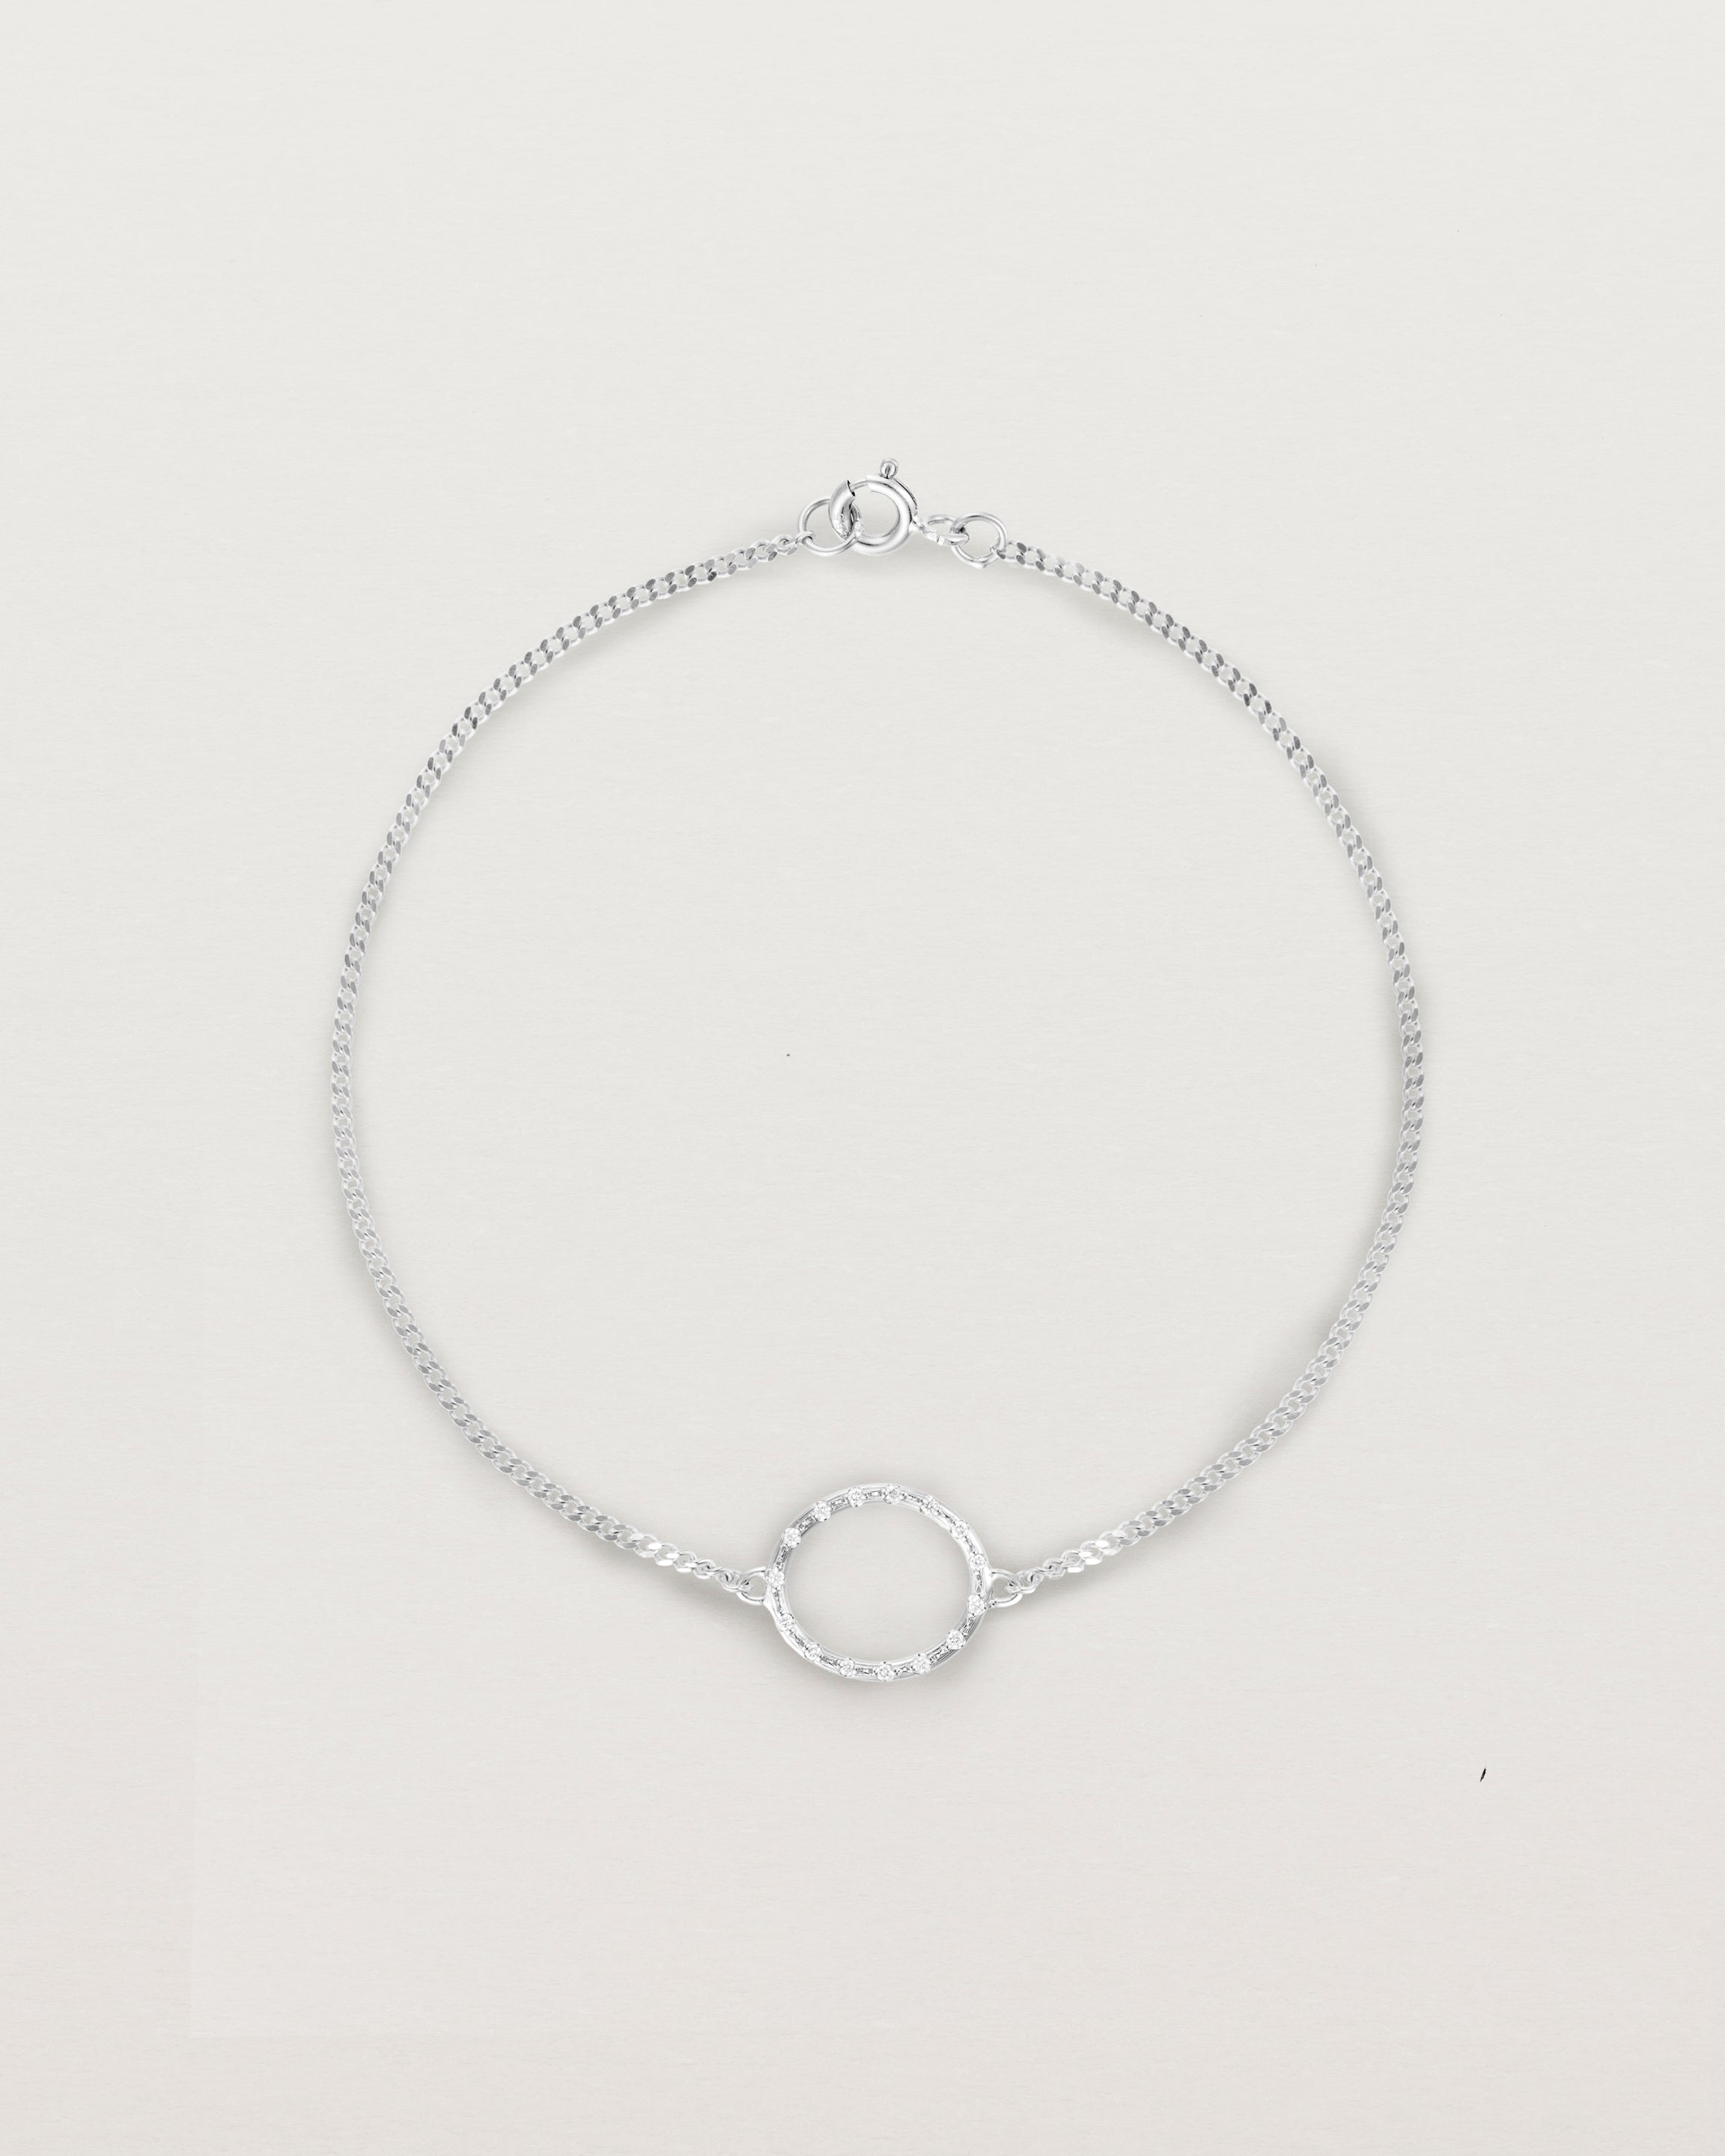 A white gold chain bracelet featuring a circle set with small white diamonds